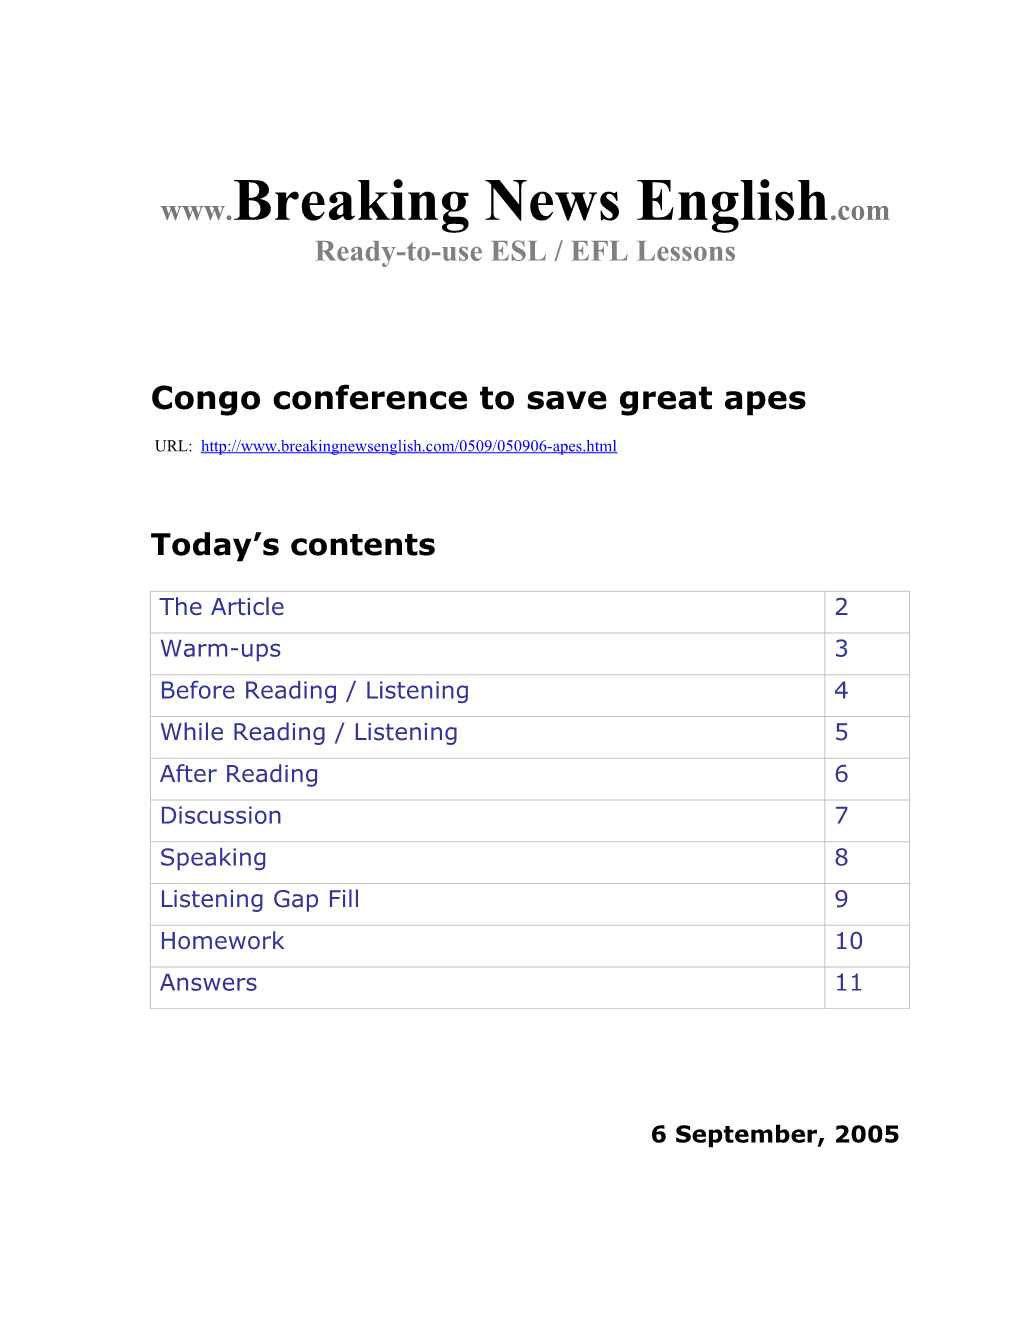 Congo Conference to Save Great Apes